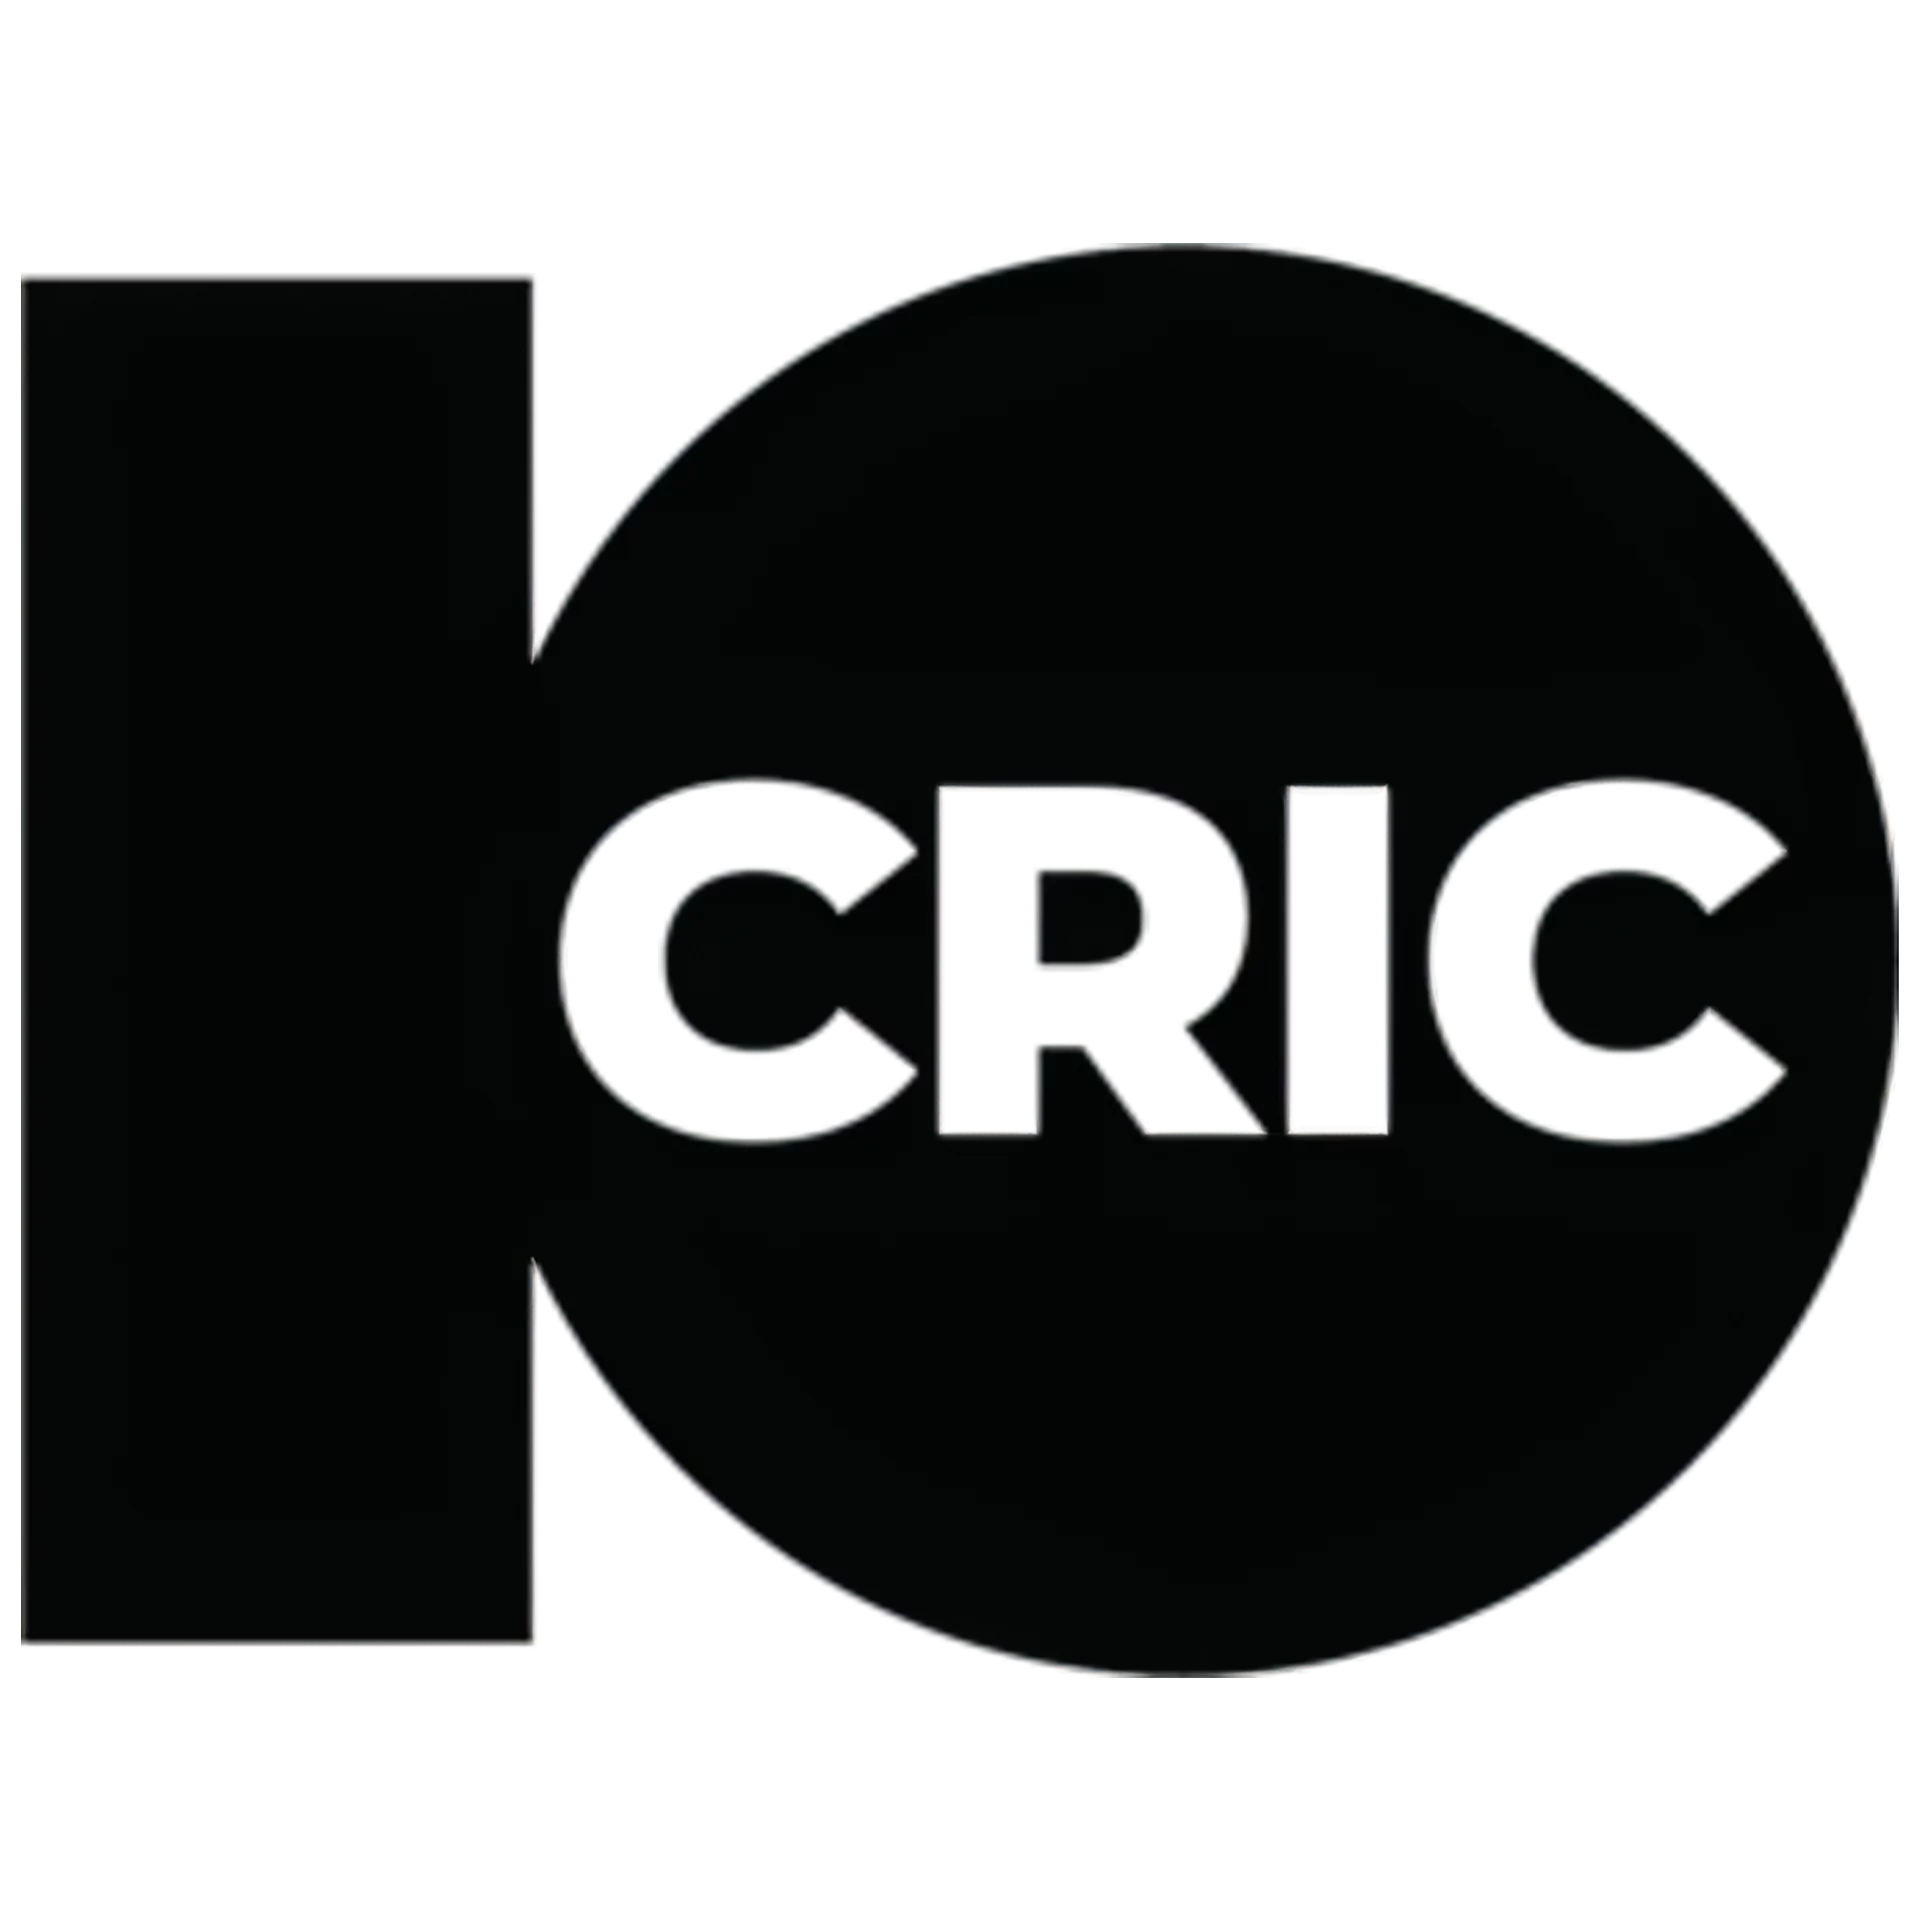 Sign up for 10cric, get bonuses and net on cricket.